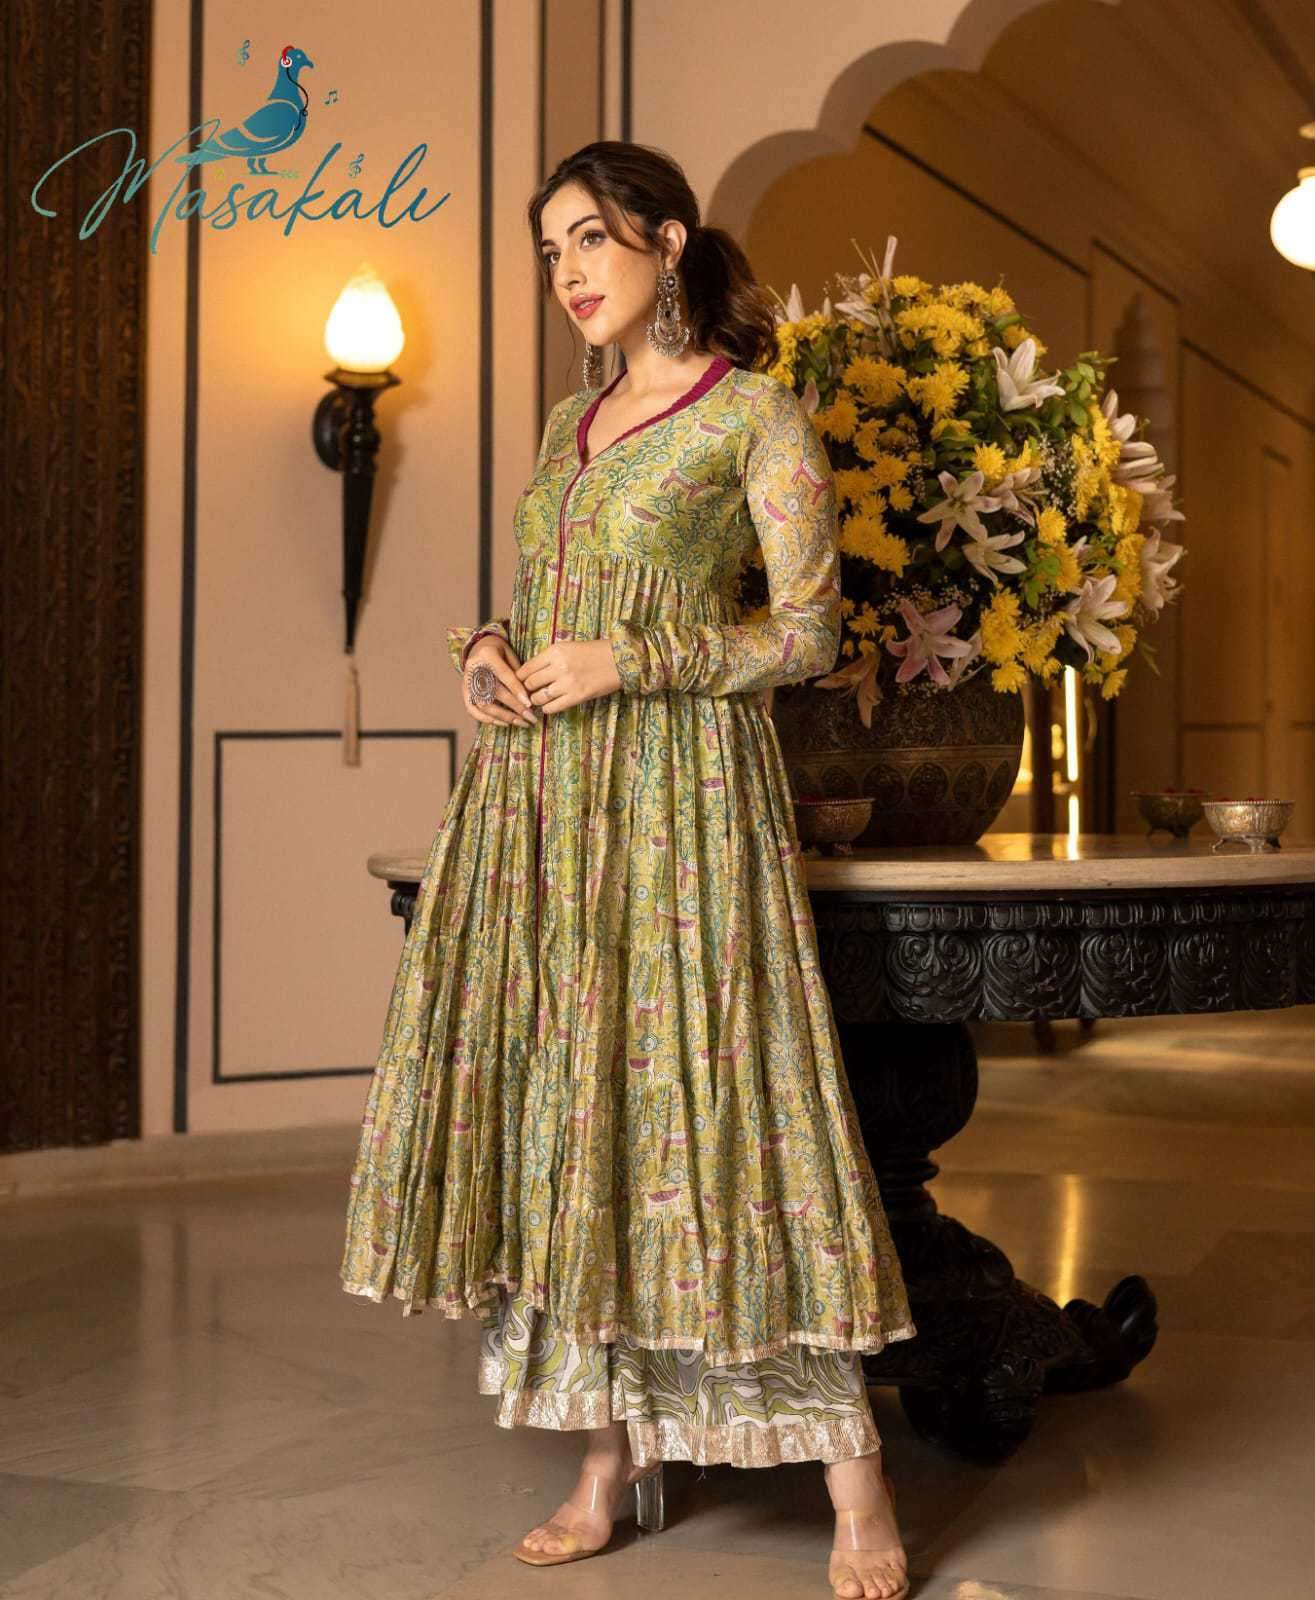 Masakali Vol 1 Latest Style Frill Designs 3 Piece Suit New Arrivals